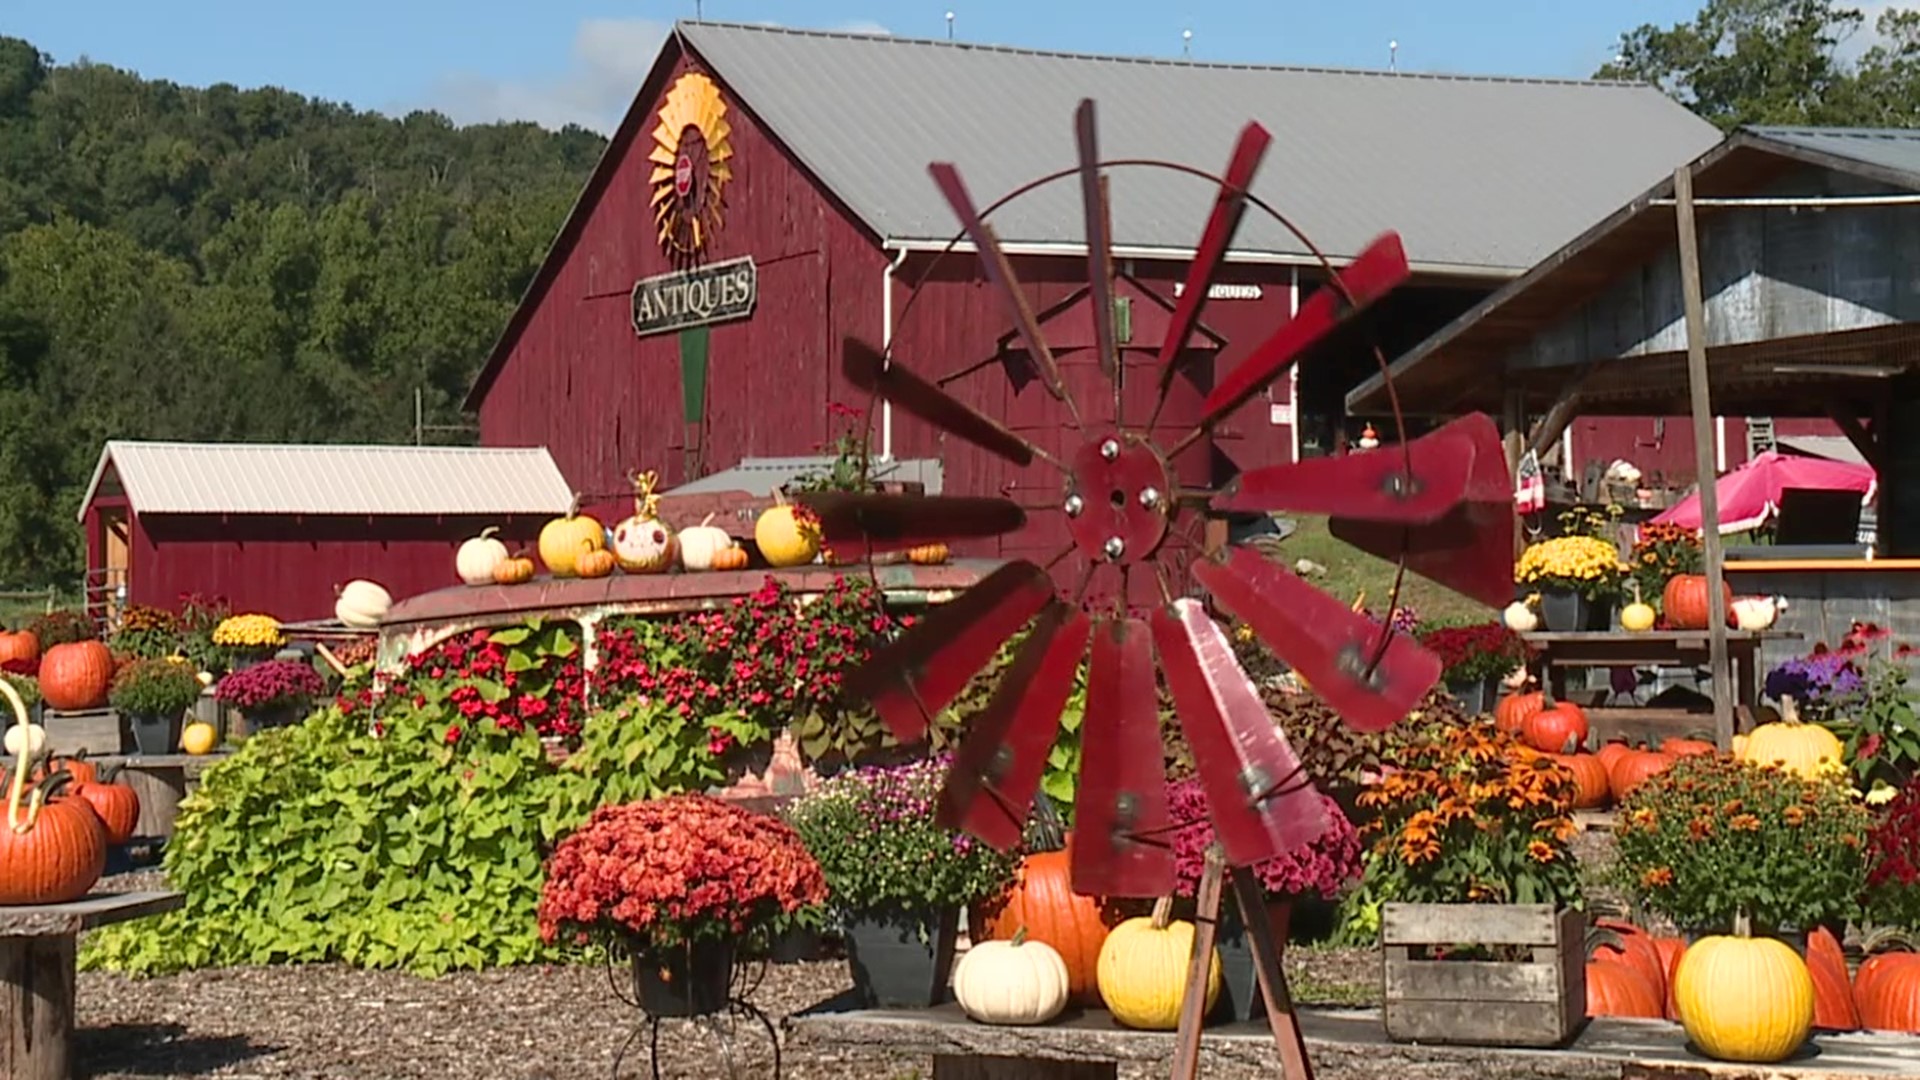 What started as a farm stand 10 years ago is now an autumn attraction.